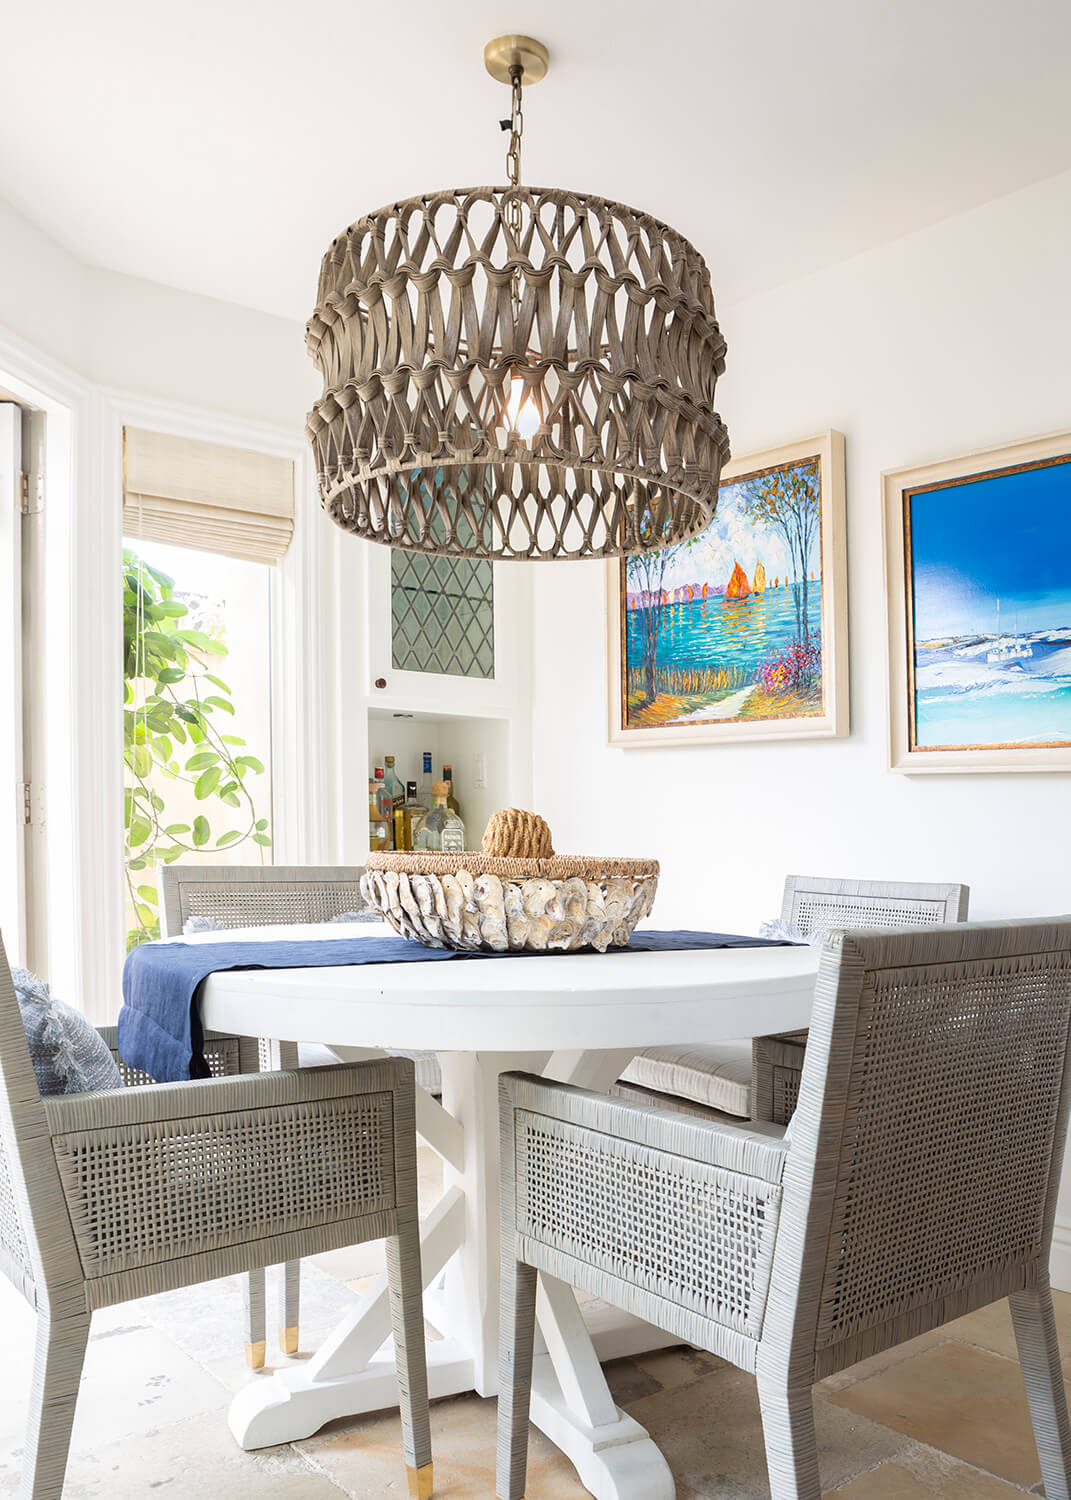 Coastal style interior design in a dining room with a large beach-inspired light.